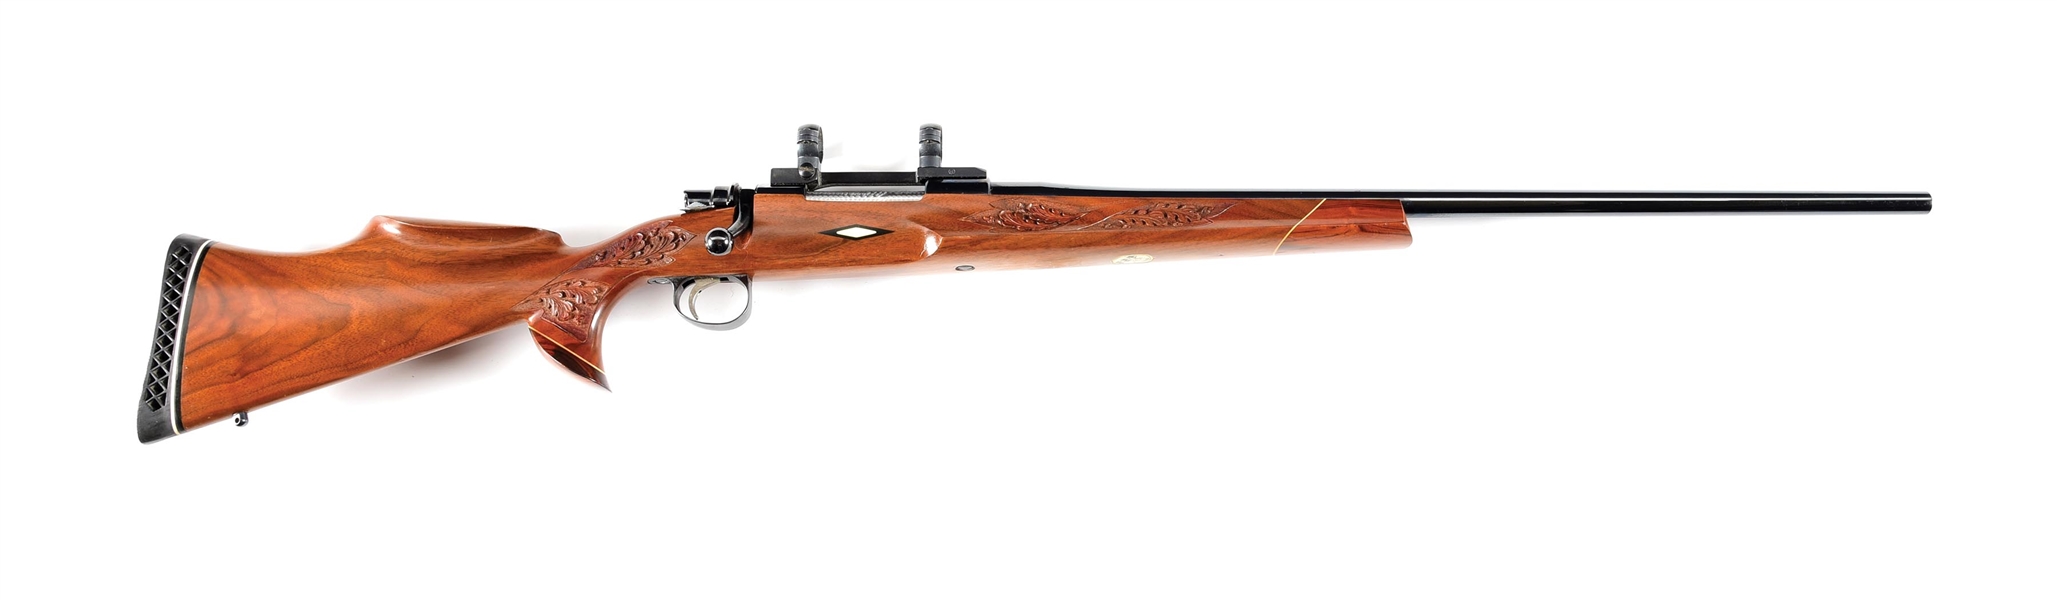 (M) WINSLOW ARMS FN MAUSER BOLT ACTION RIFLE .257 WEATHERBY MAGNUM